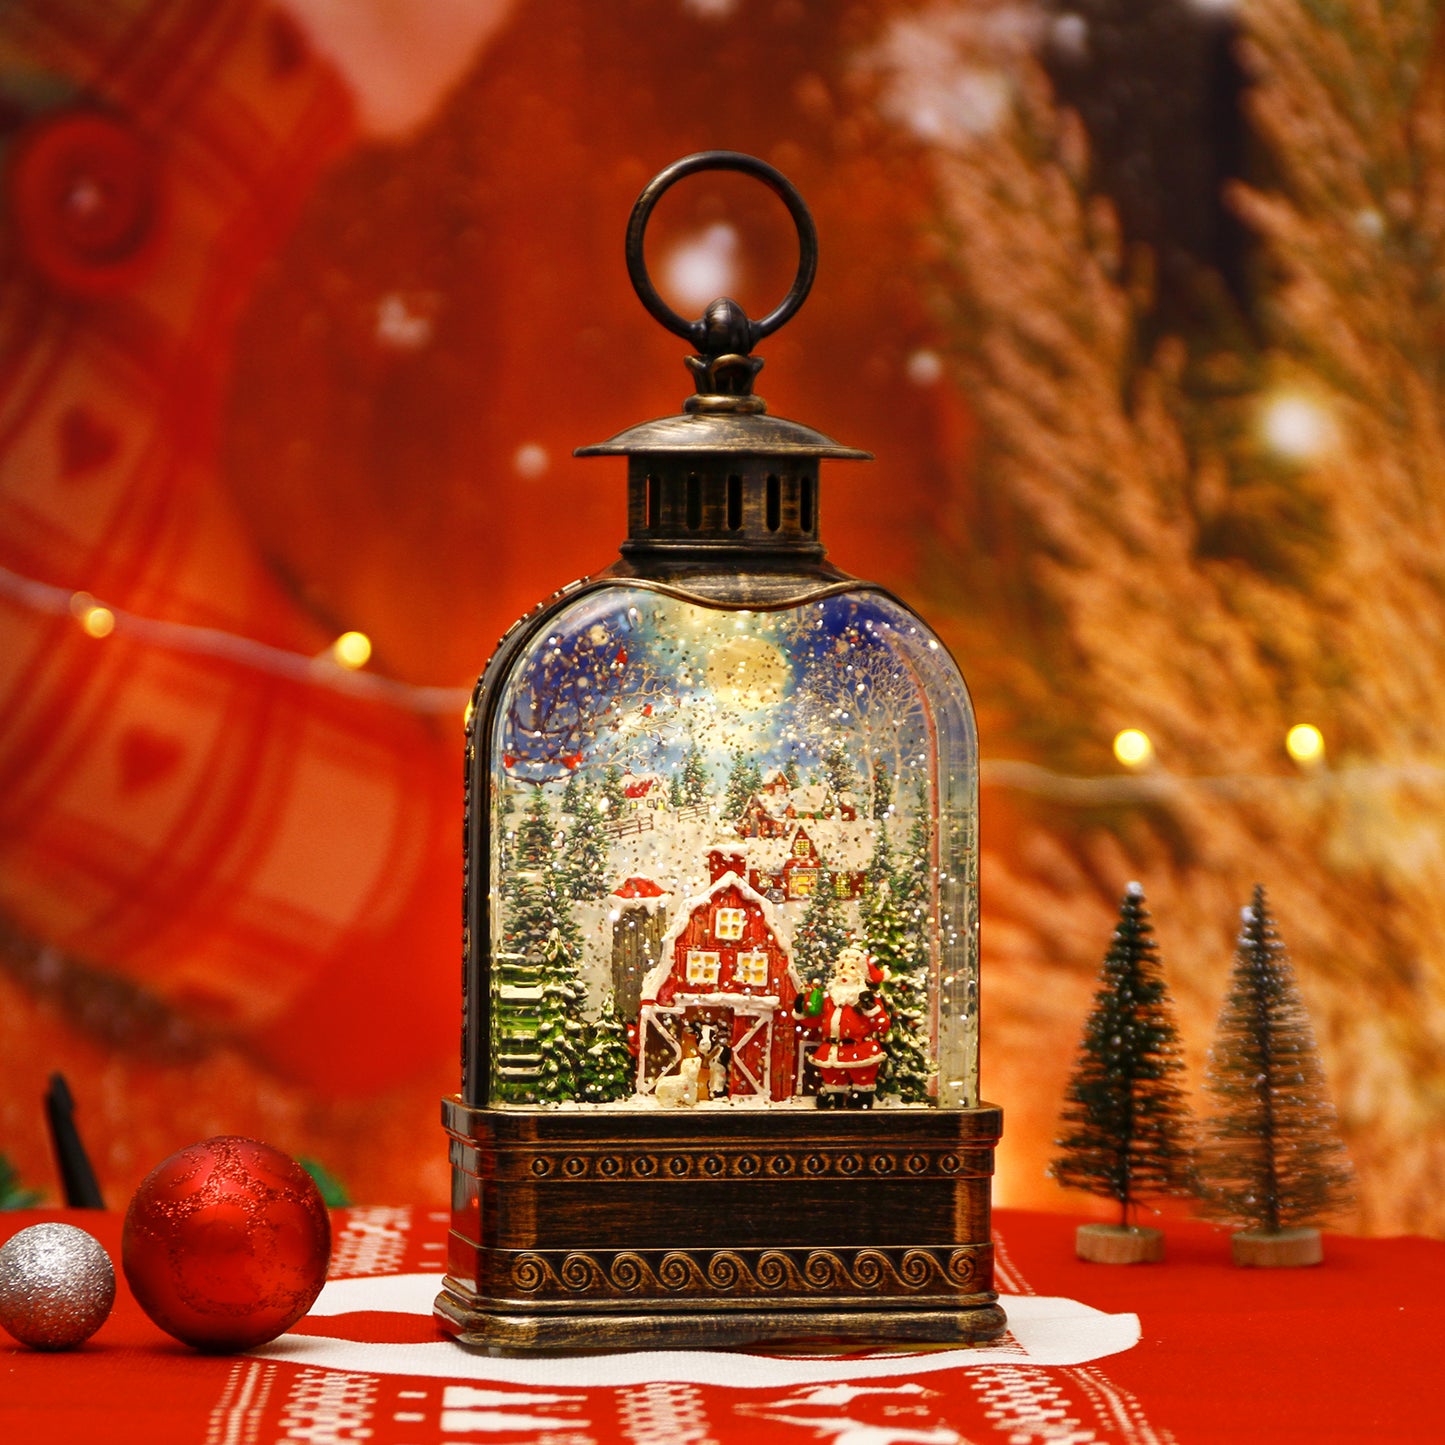 11 inch Christmas Snow Globe Water Lantern, Musical Glittering Xmas Water Globe Church Lantern with 6 Hour Timer(Santa Claus Giving gifts in Snow Village)